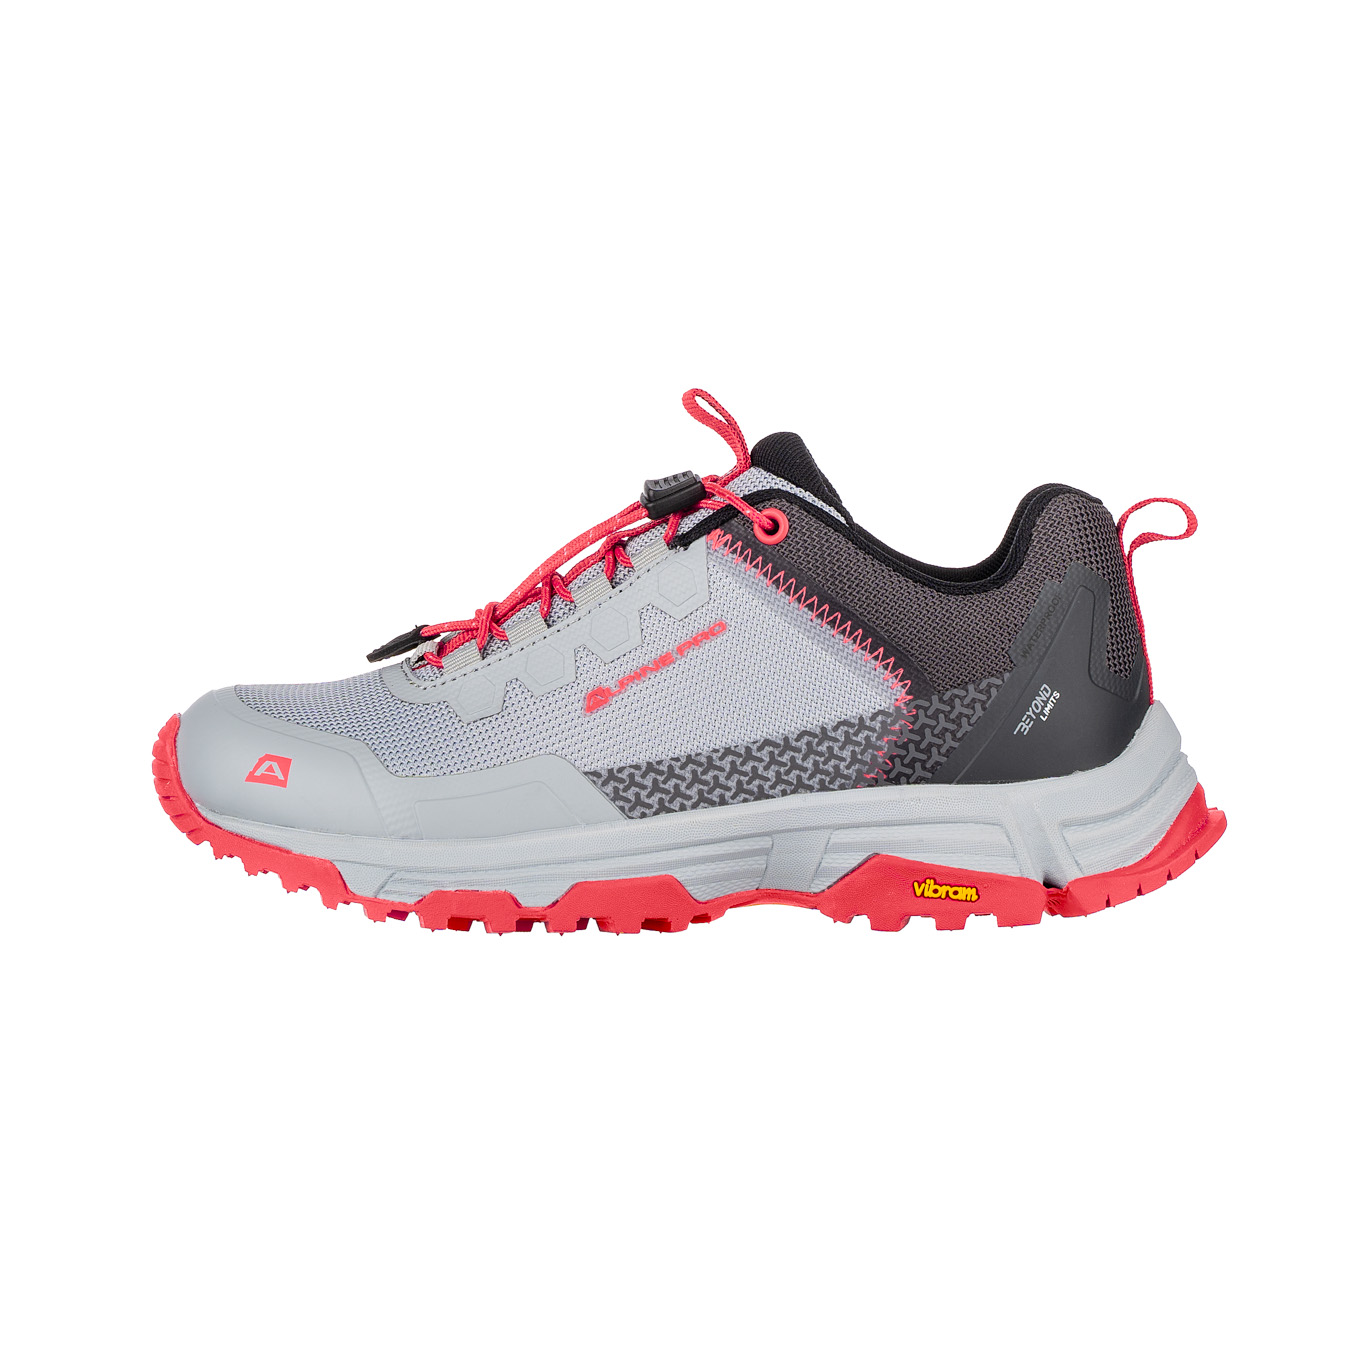 Sports shoes with ptx membrane ALPINE PRO ARAGE high rise